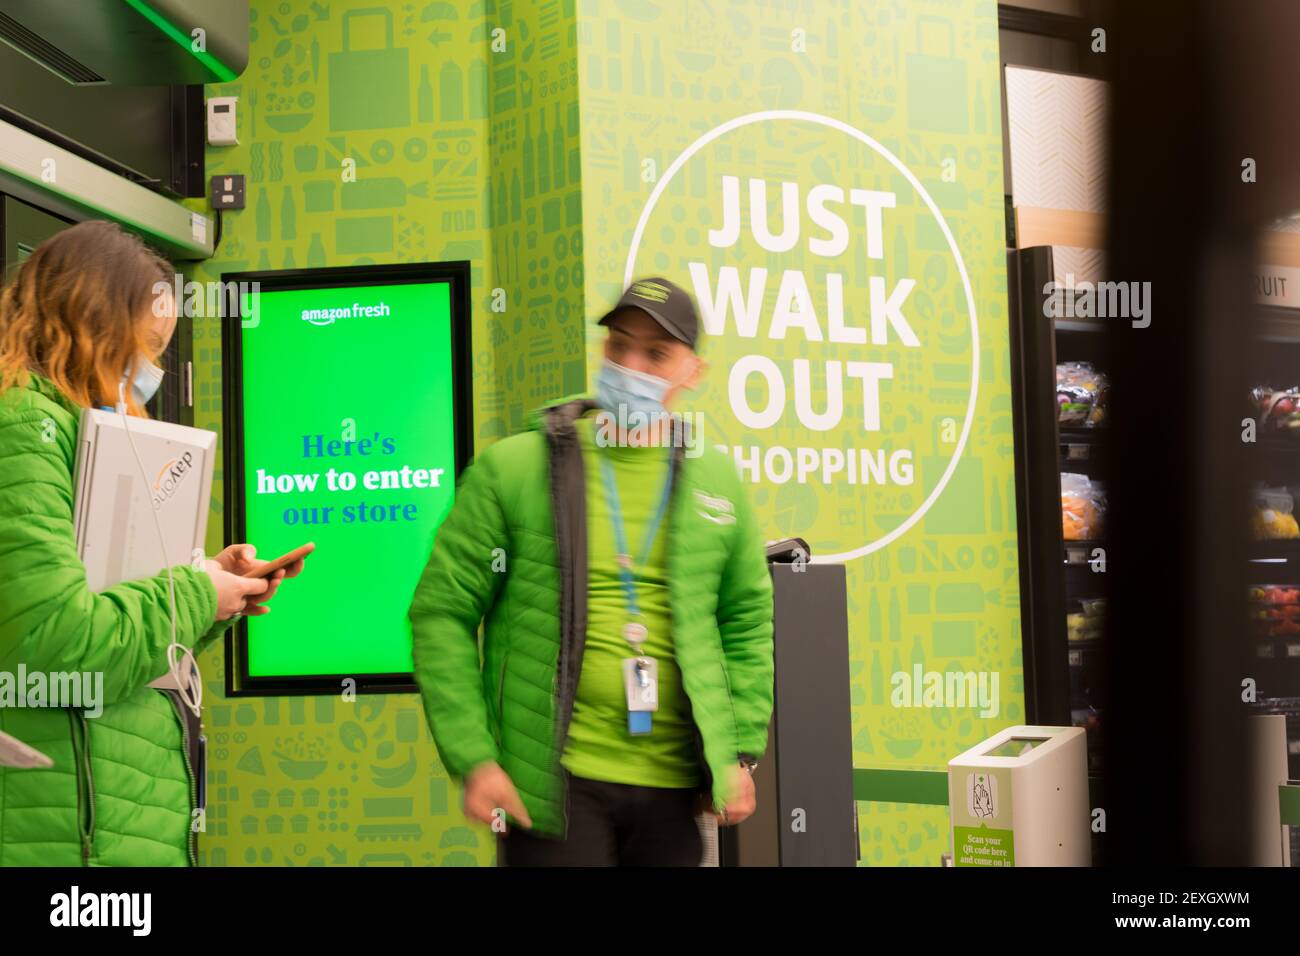 Amazon fresh opens  its first store with 'Just walk out' at Ealing London, UK Stock Photo